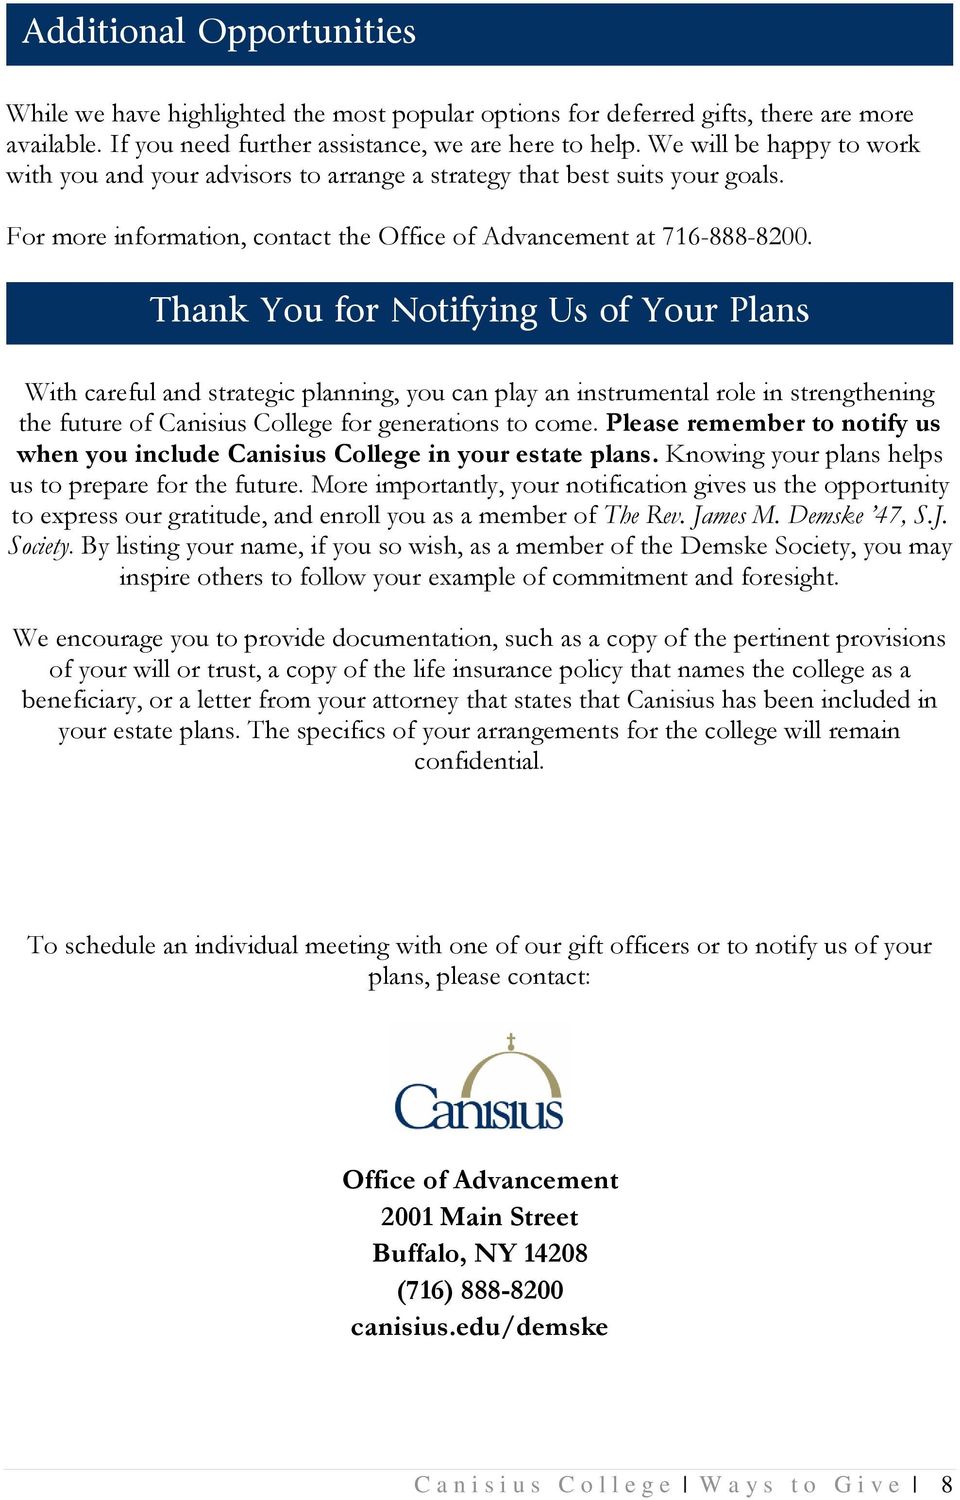 Than Thank You for Notifying Us of Your Plans k You for Notifying Us of Your Plans With careful and strategic planning, you can play an instrumental role in strengthening the future of Canisius